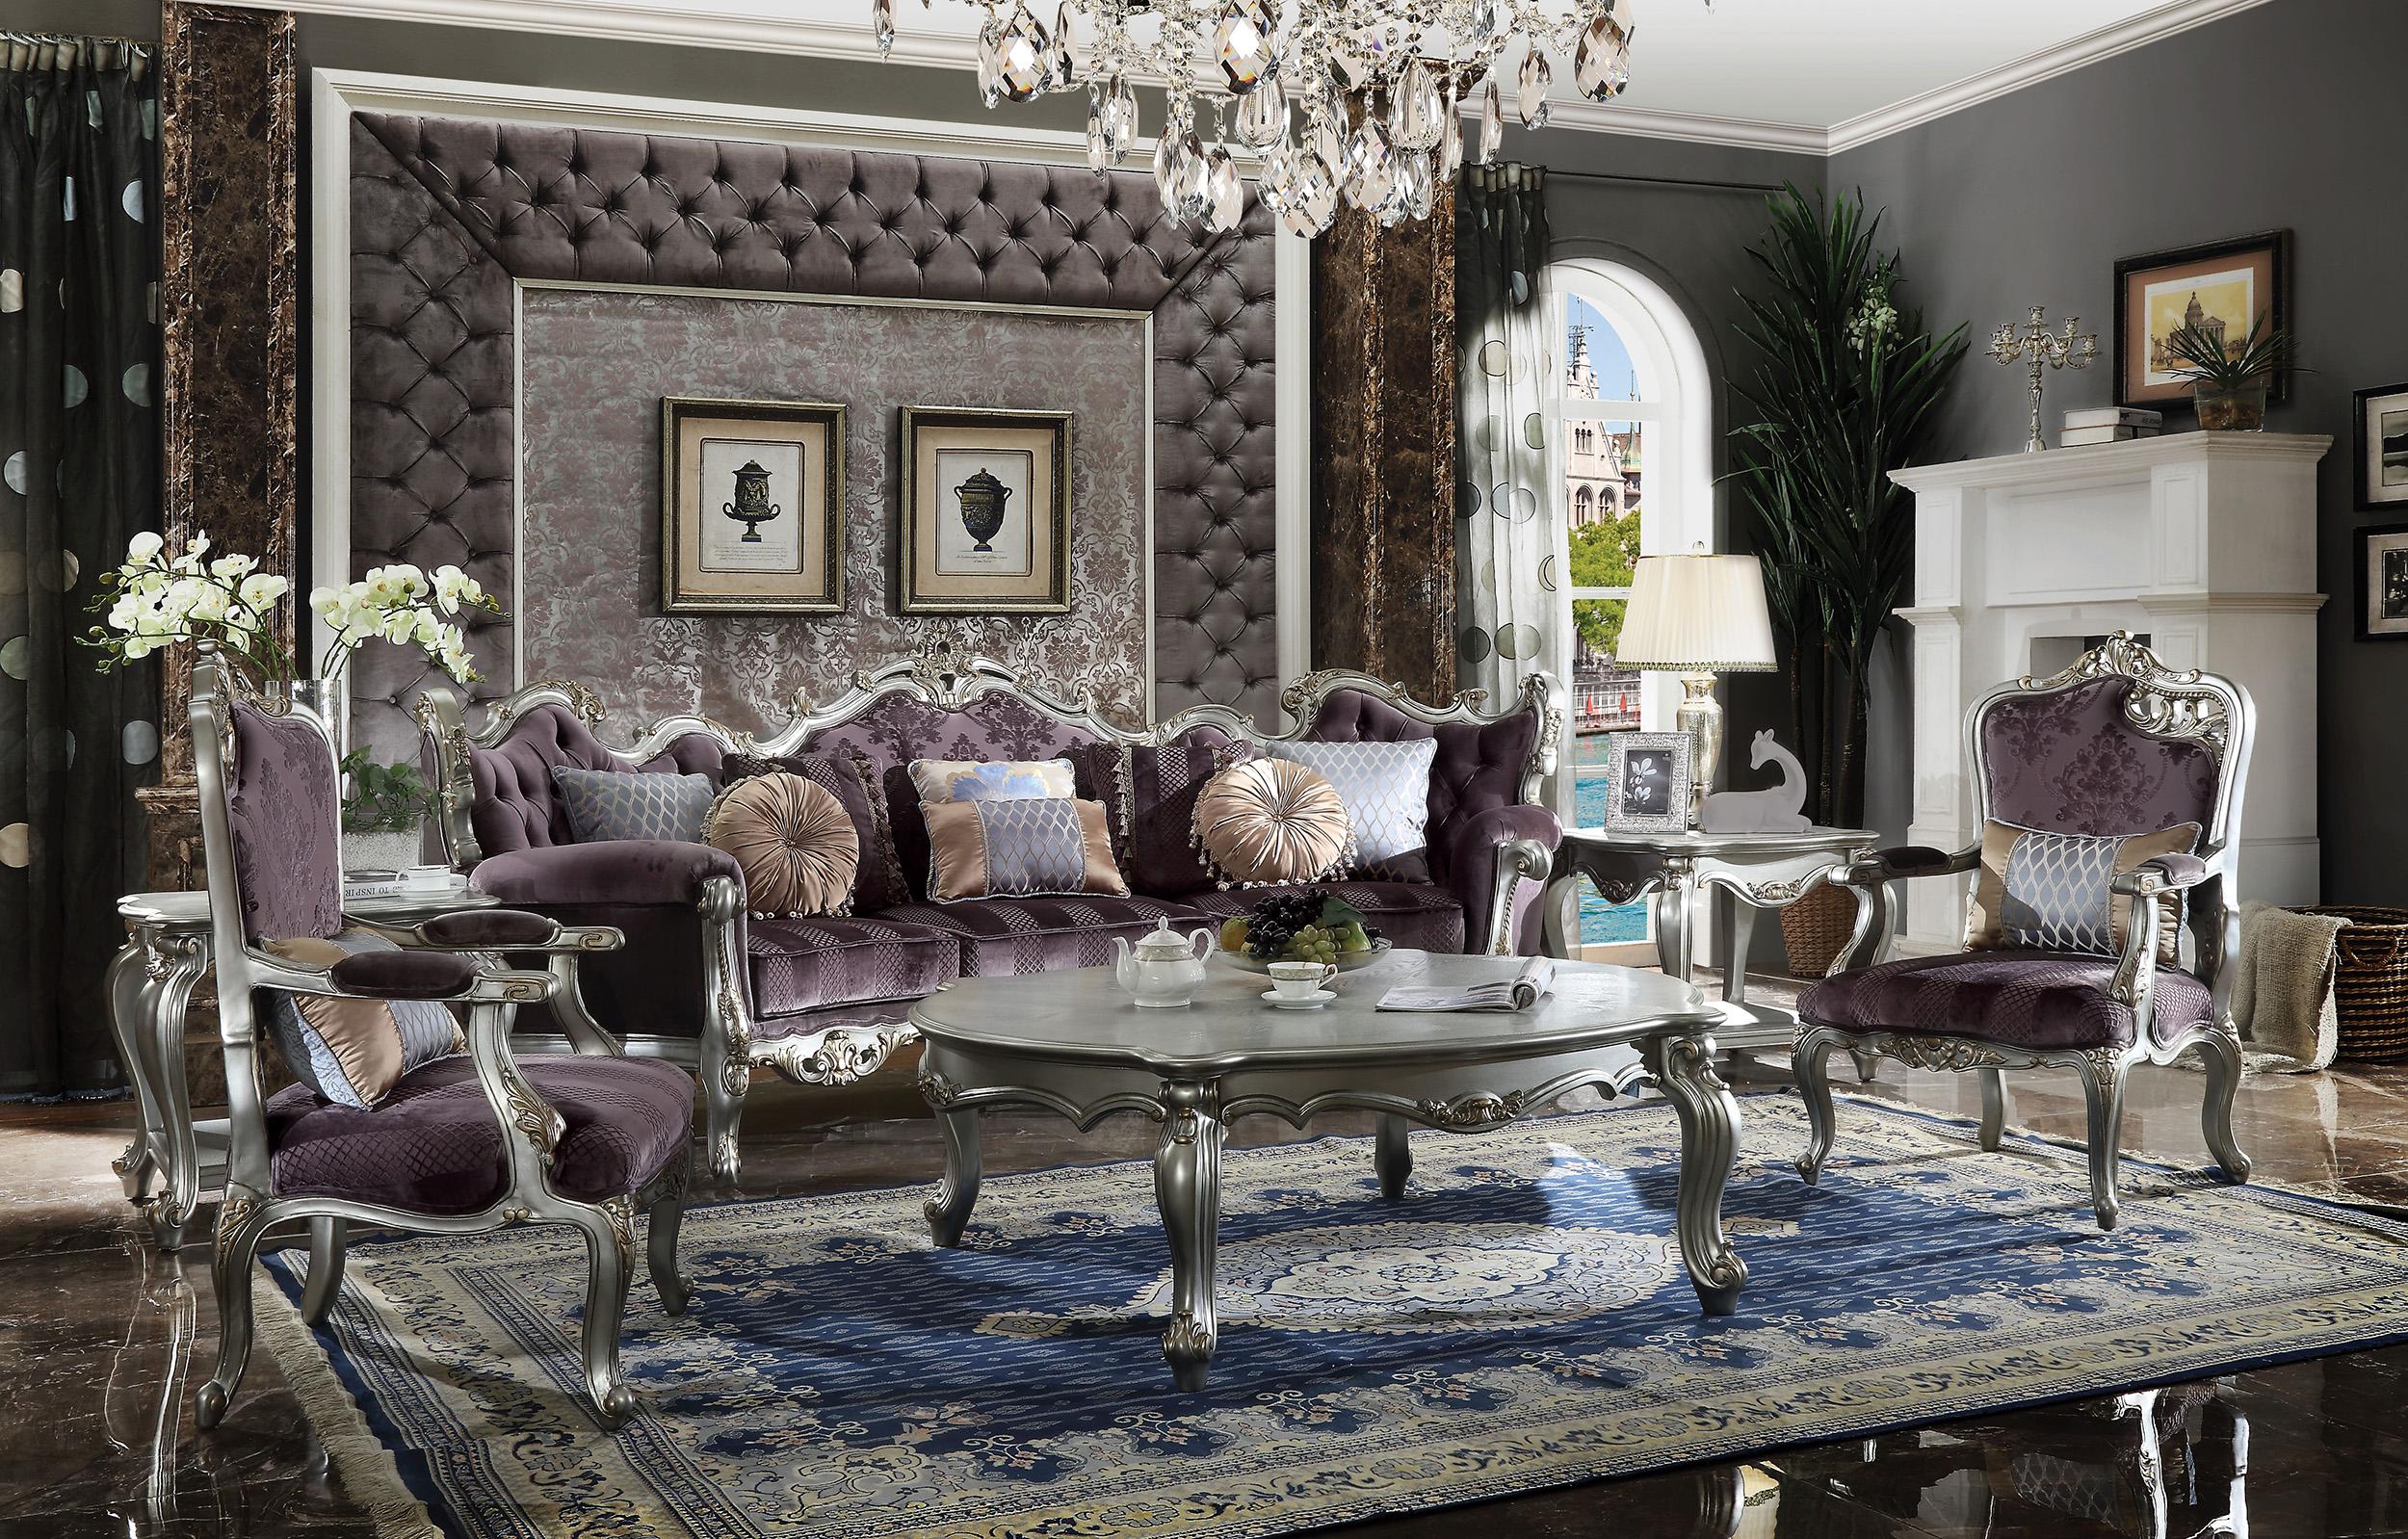 Classic, Traditional Sofa Set Picardy II 53465 53465-Set-3-Picardy II in Platinum, Antique, Violet Velvet